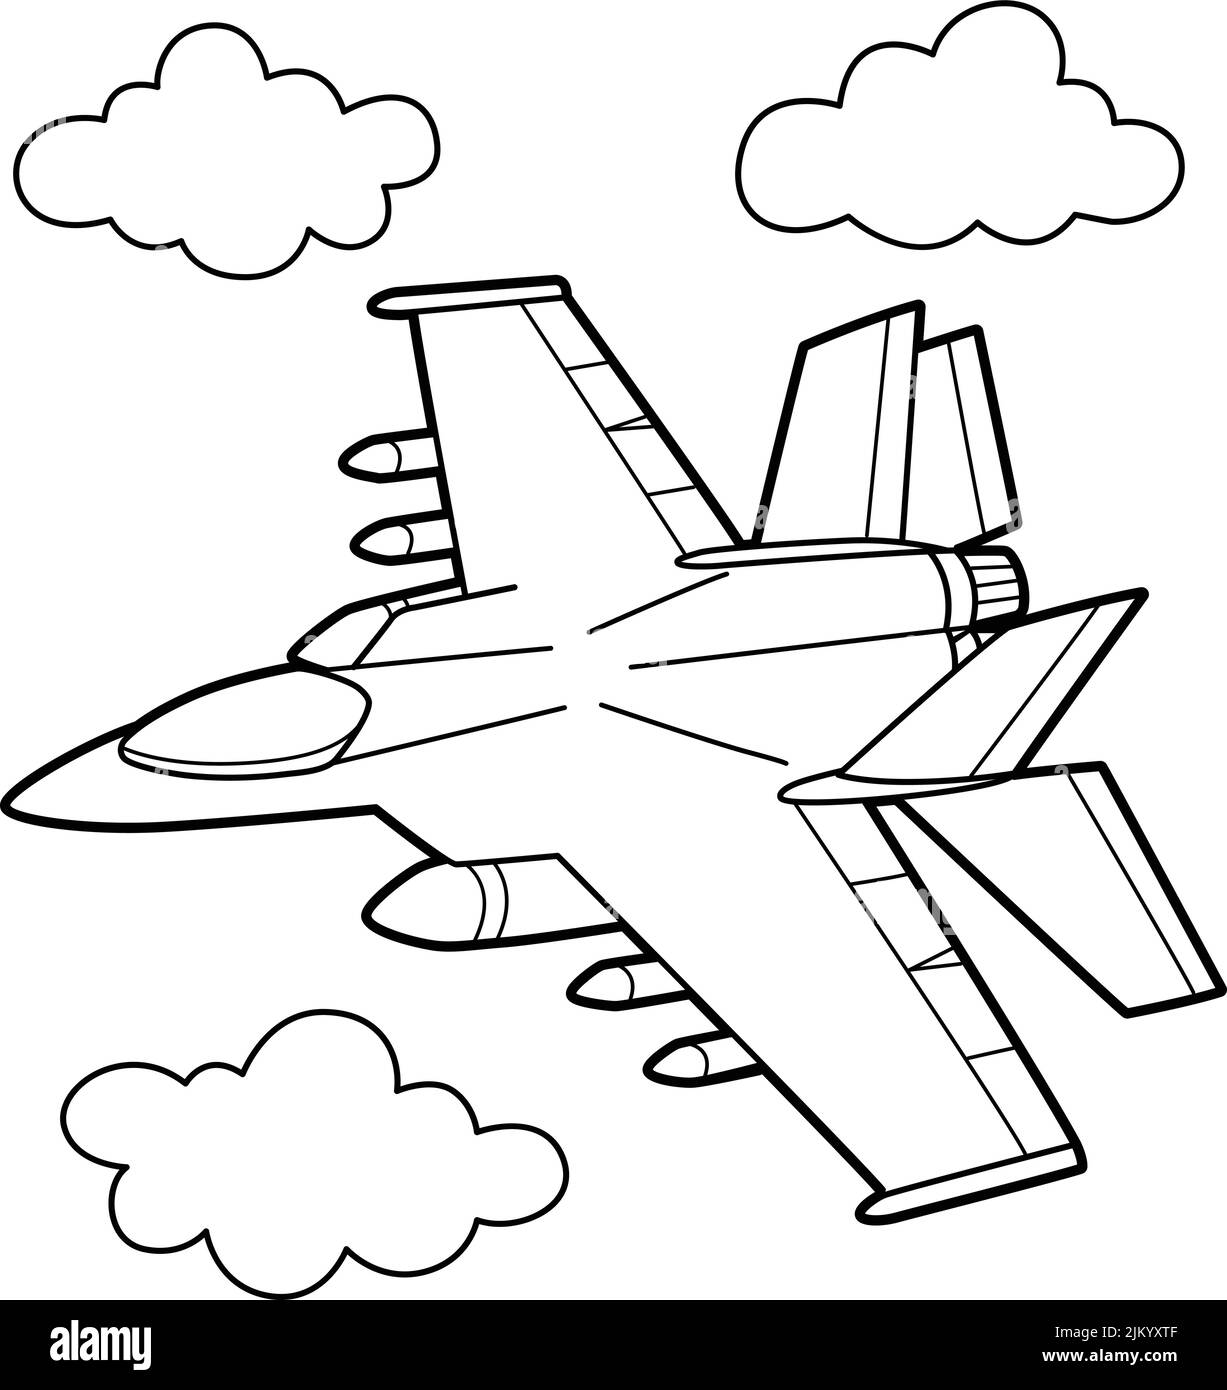 Jet Fighter Vehicle Coloring Page for Kids Stock Vector